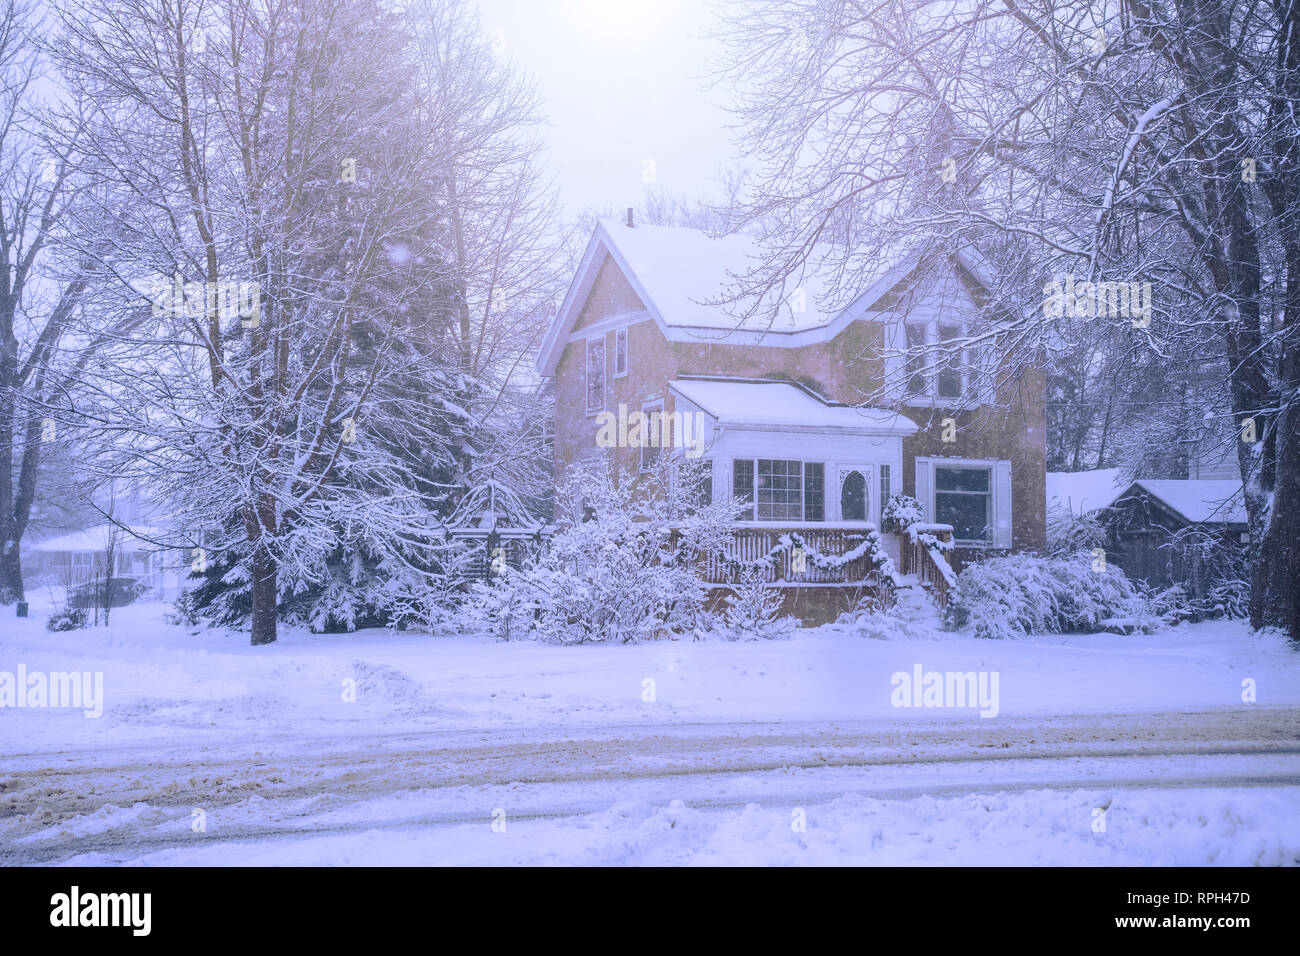 A old house in Stratford, Ontario, during the winter season. Stock Photo